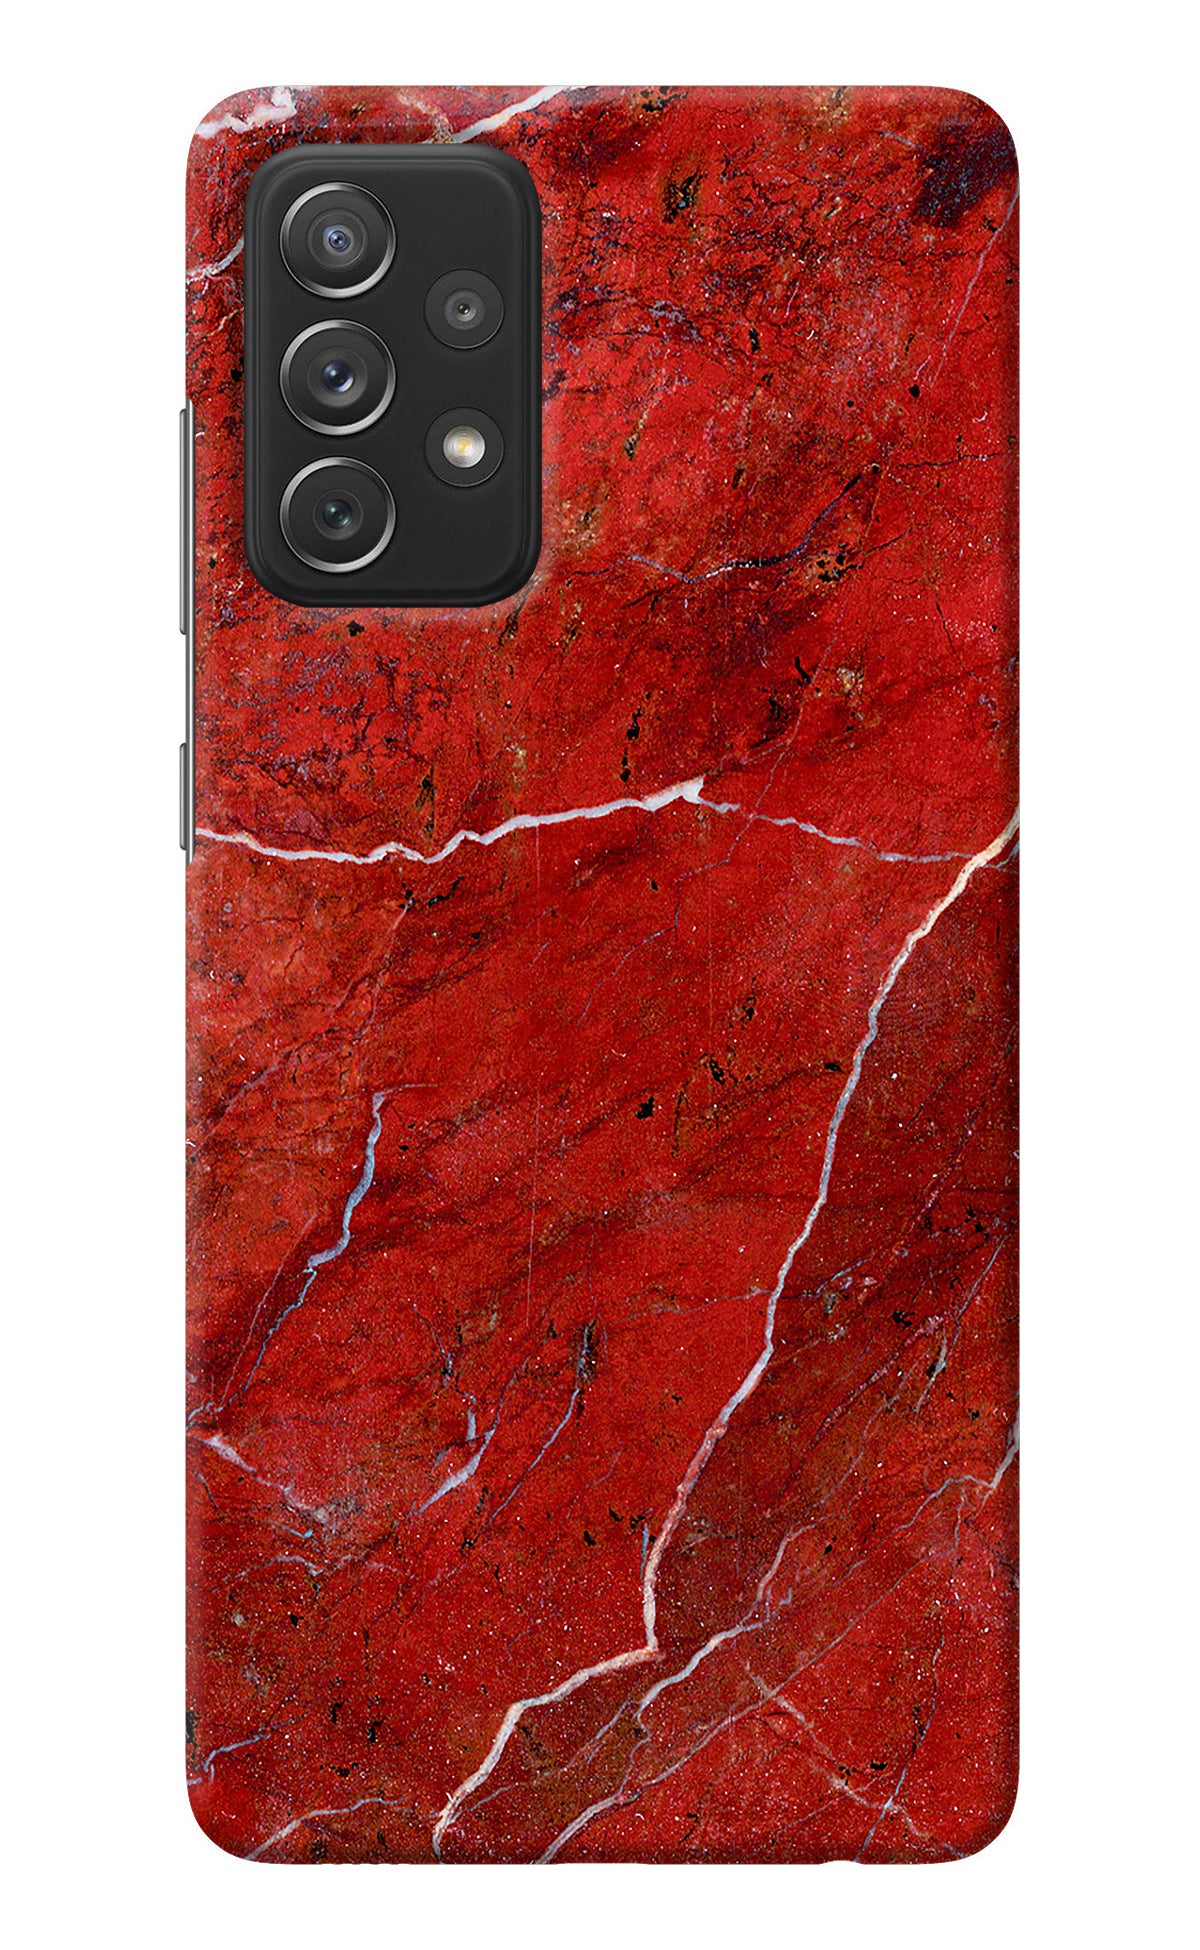 Red Marble Design Samsung A72 Back Cover